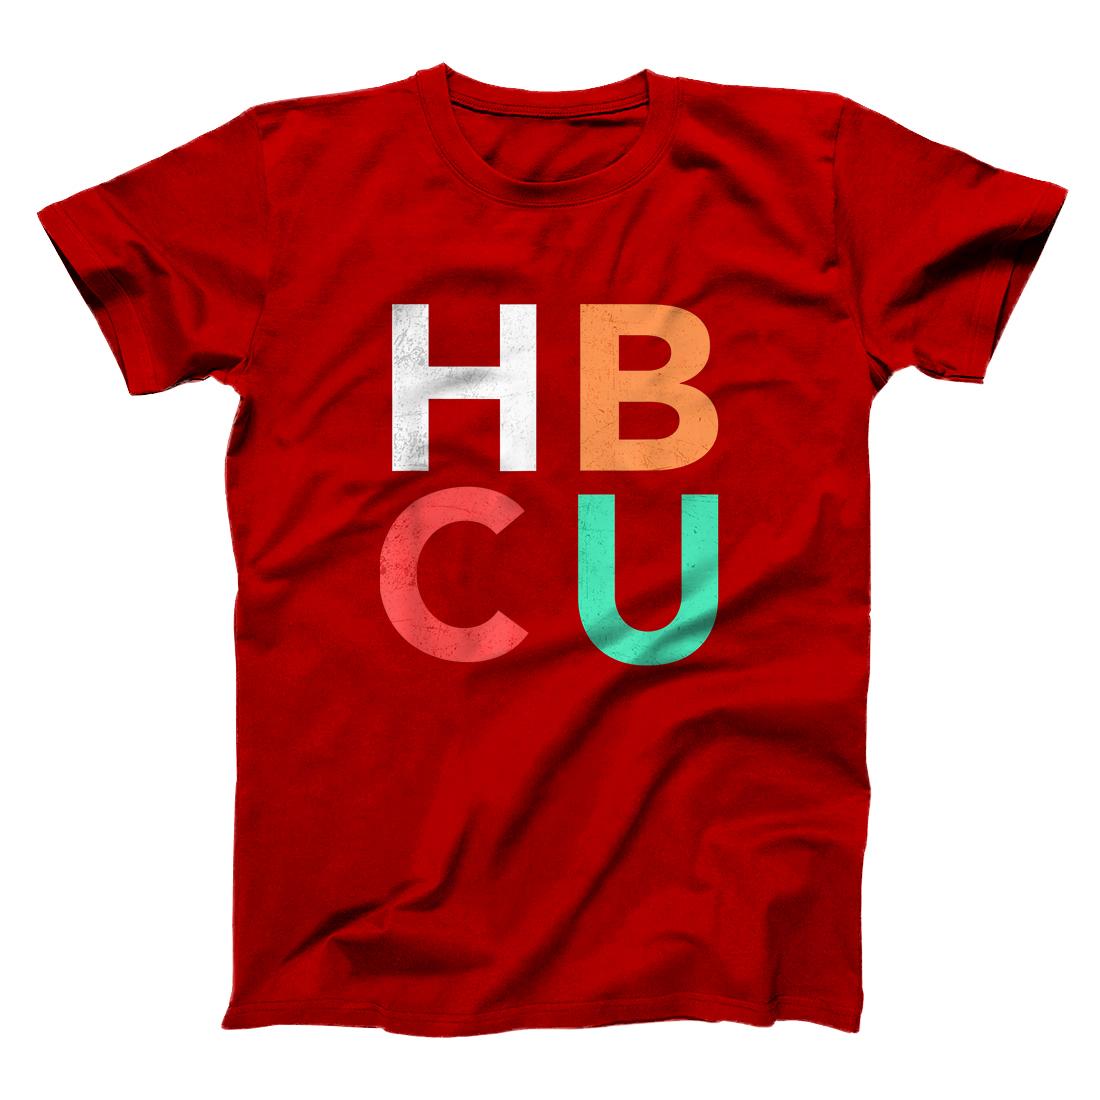 Hbcu Historically Black Colleges And Universities T Shirt All Star Shirt 0171